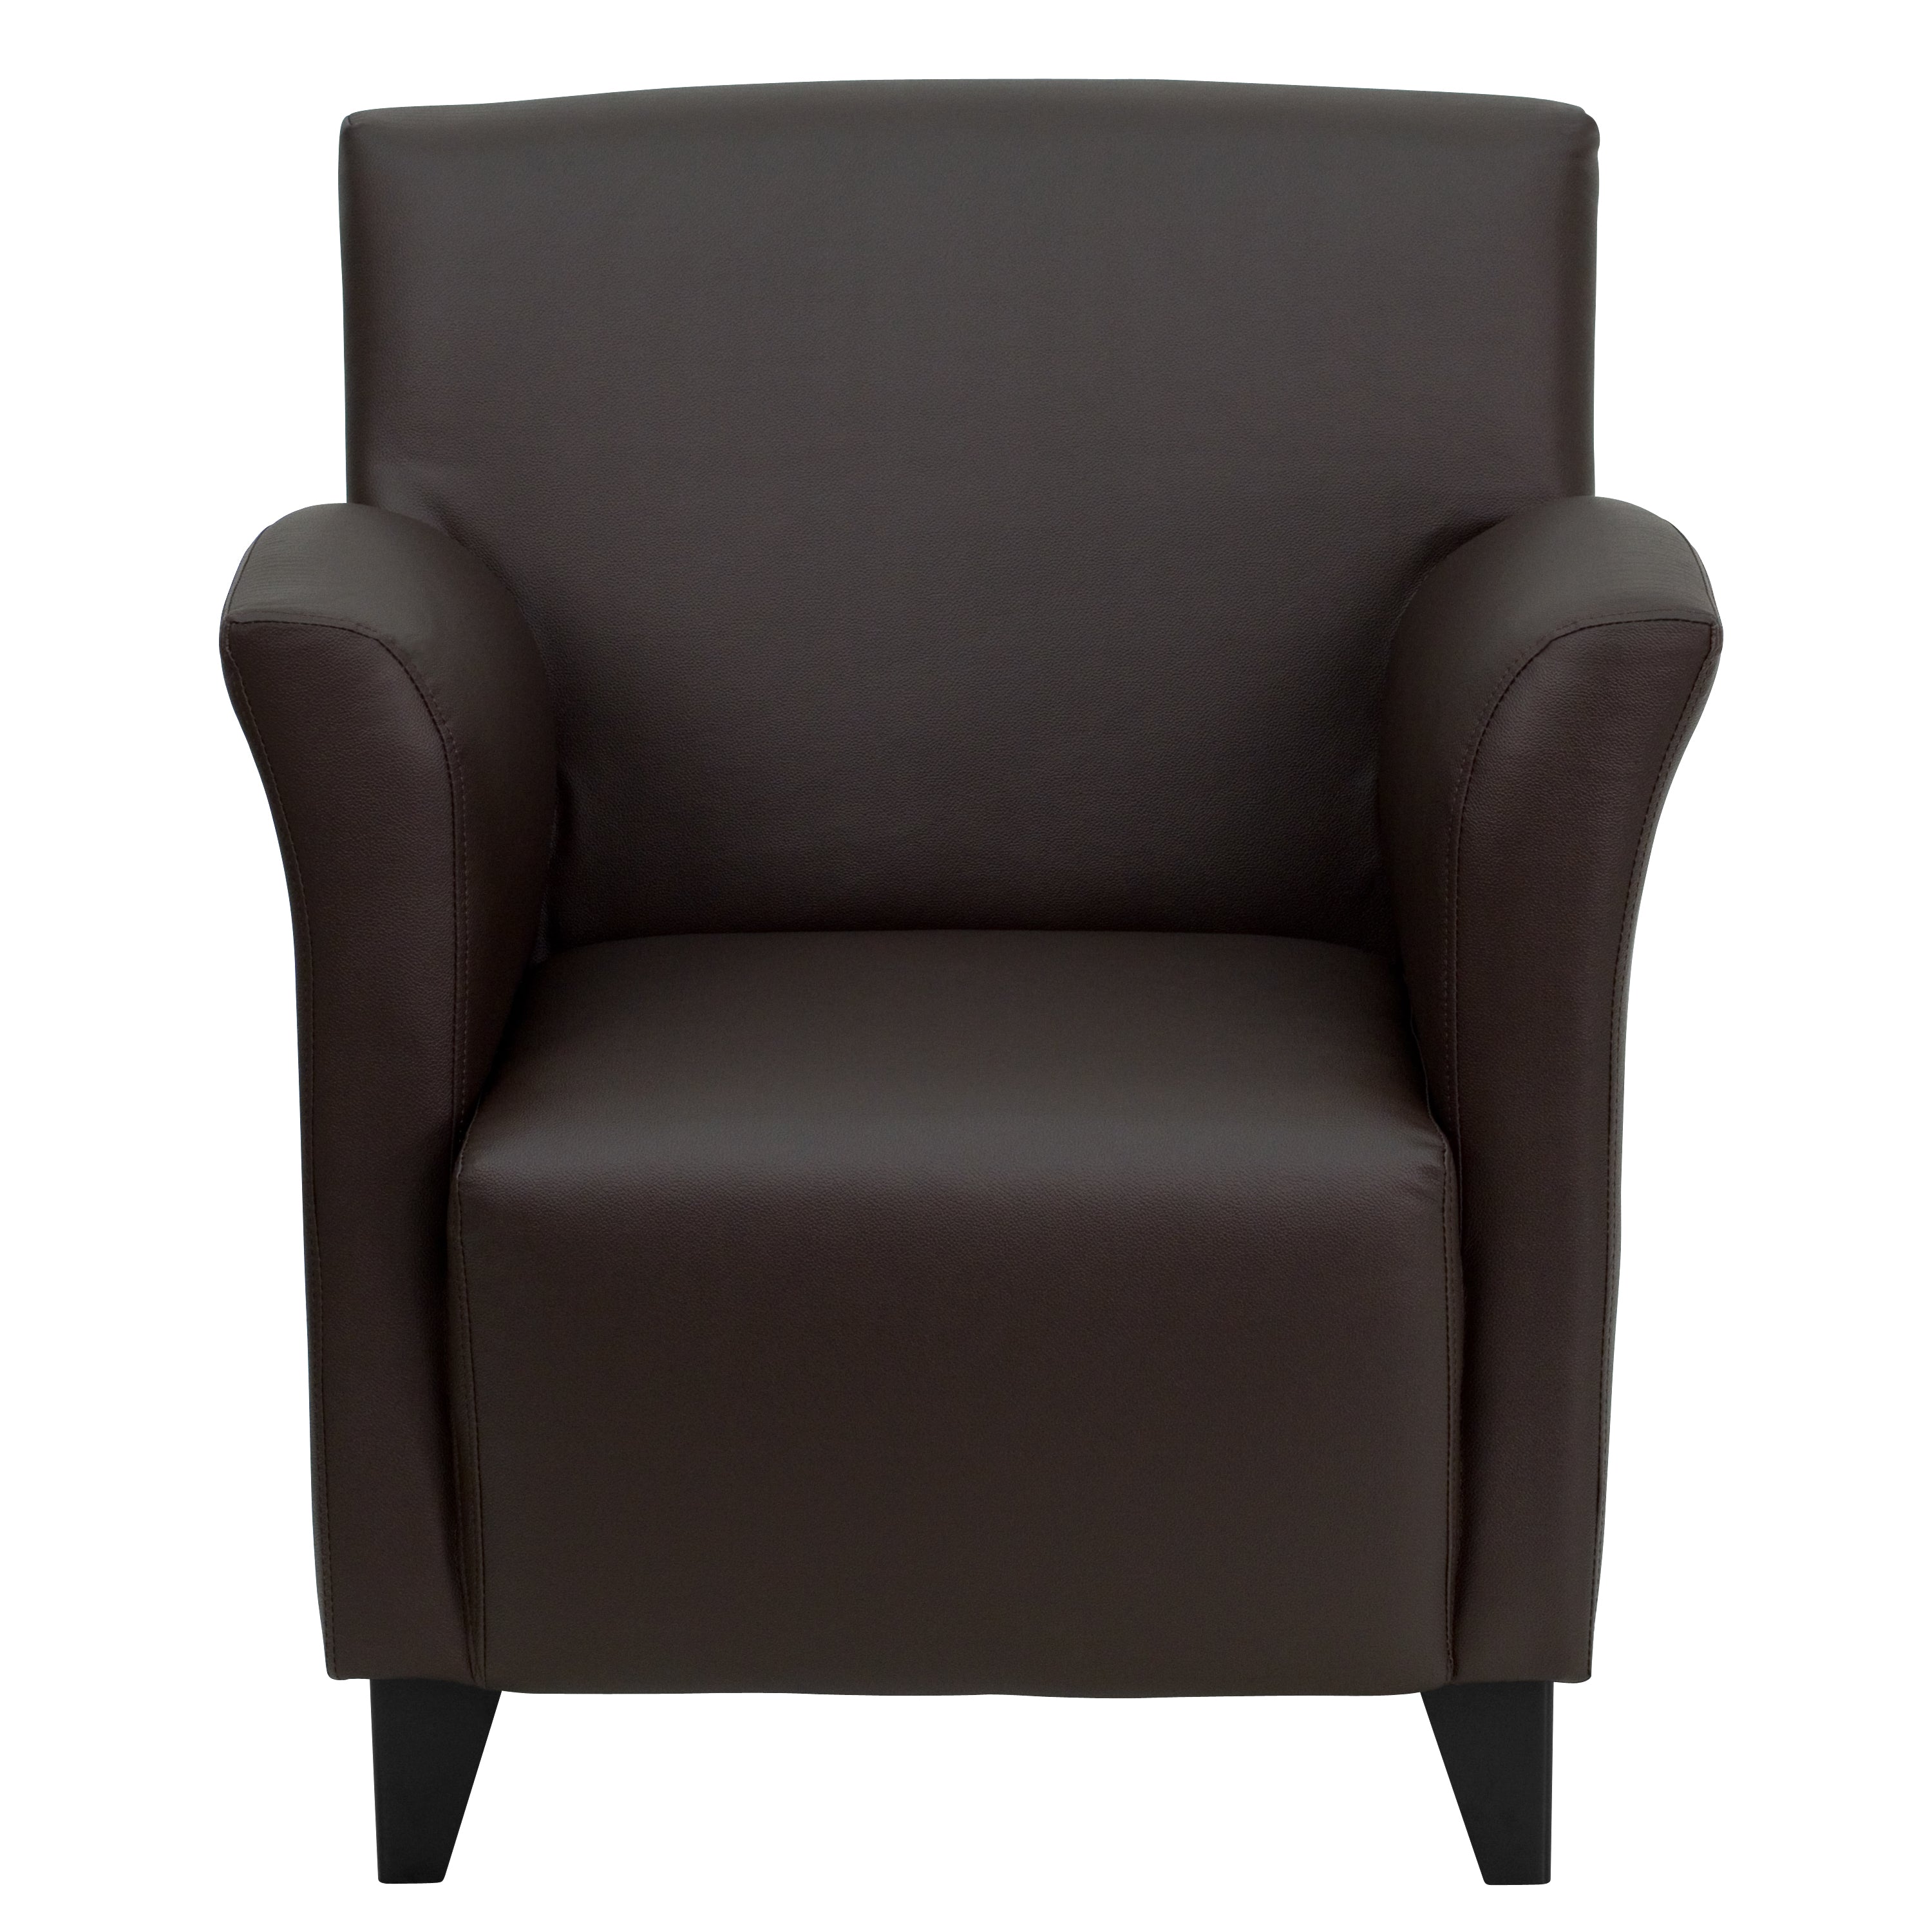 HERCULES Roman Series LeatherSoft Lounge Chair with Flared Arms-Reception Chair-Flash Furniture-Wall2Wall Furnishings